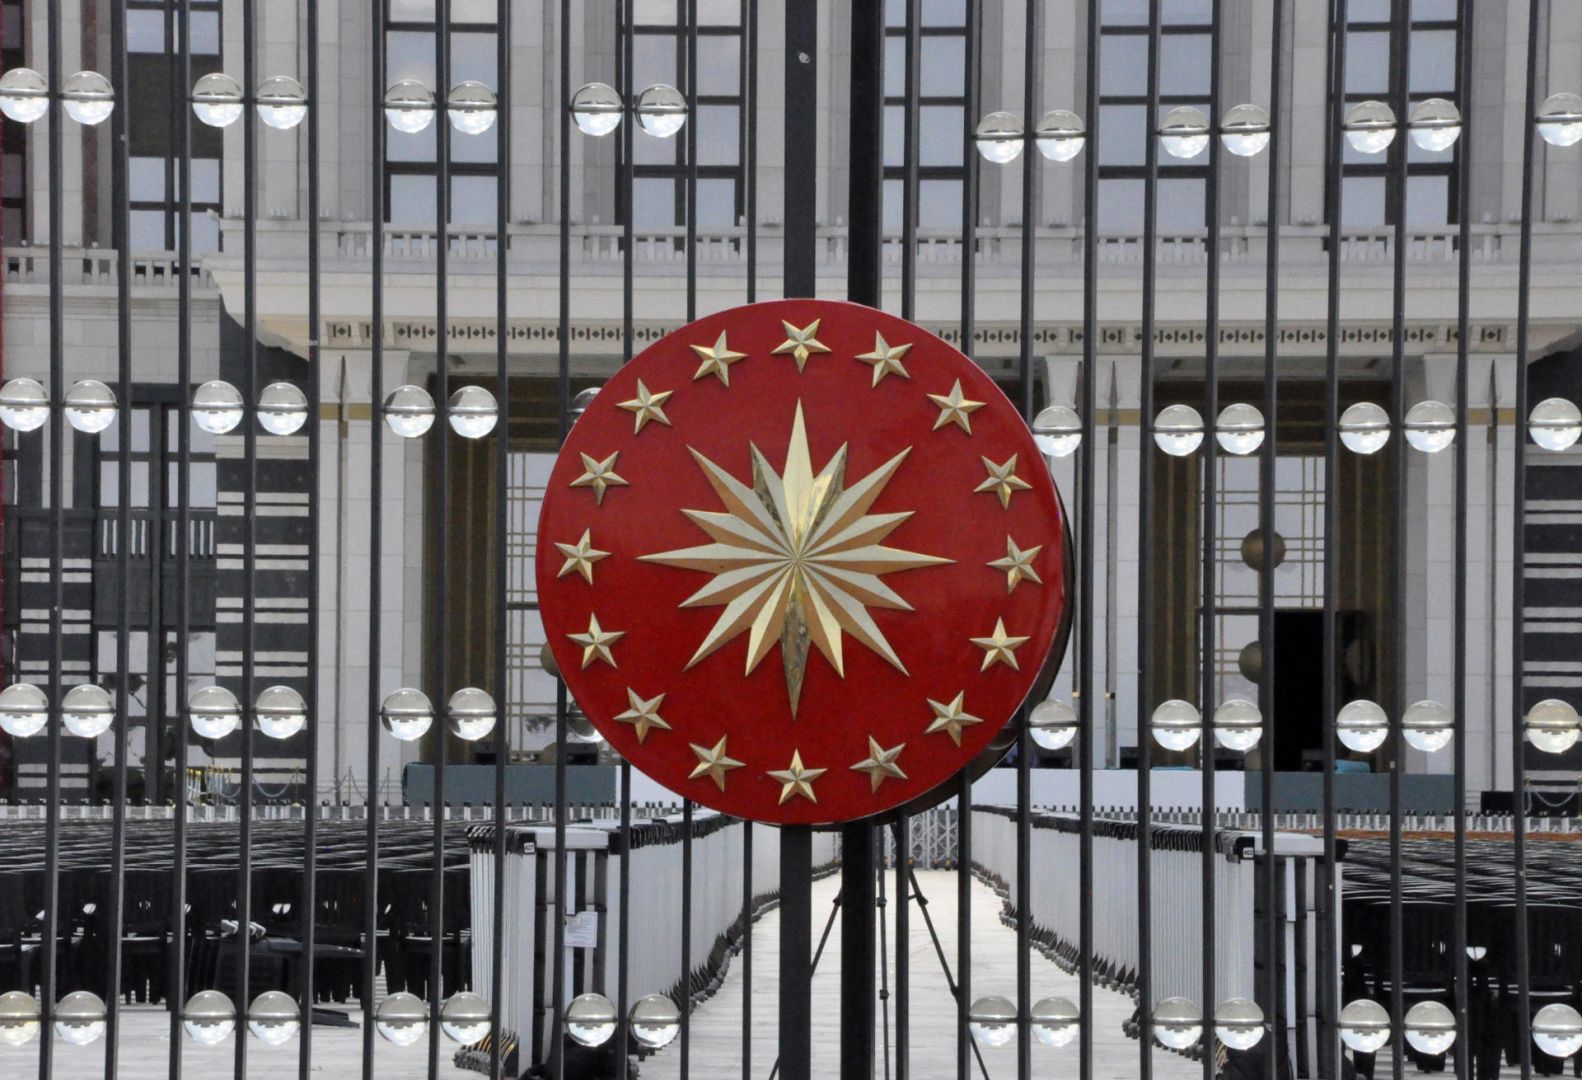 Turkiye to continue providing full support to fraternal Azerbaijan - presidential office [PHOTO]